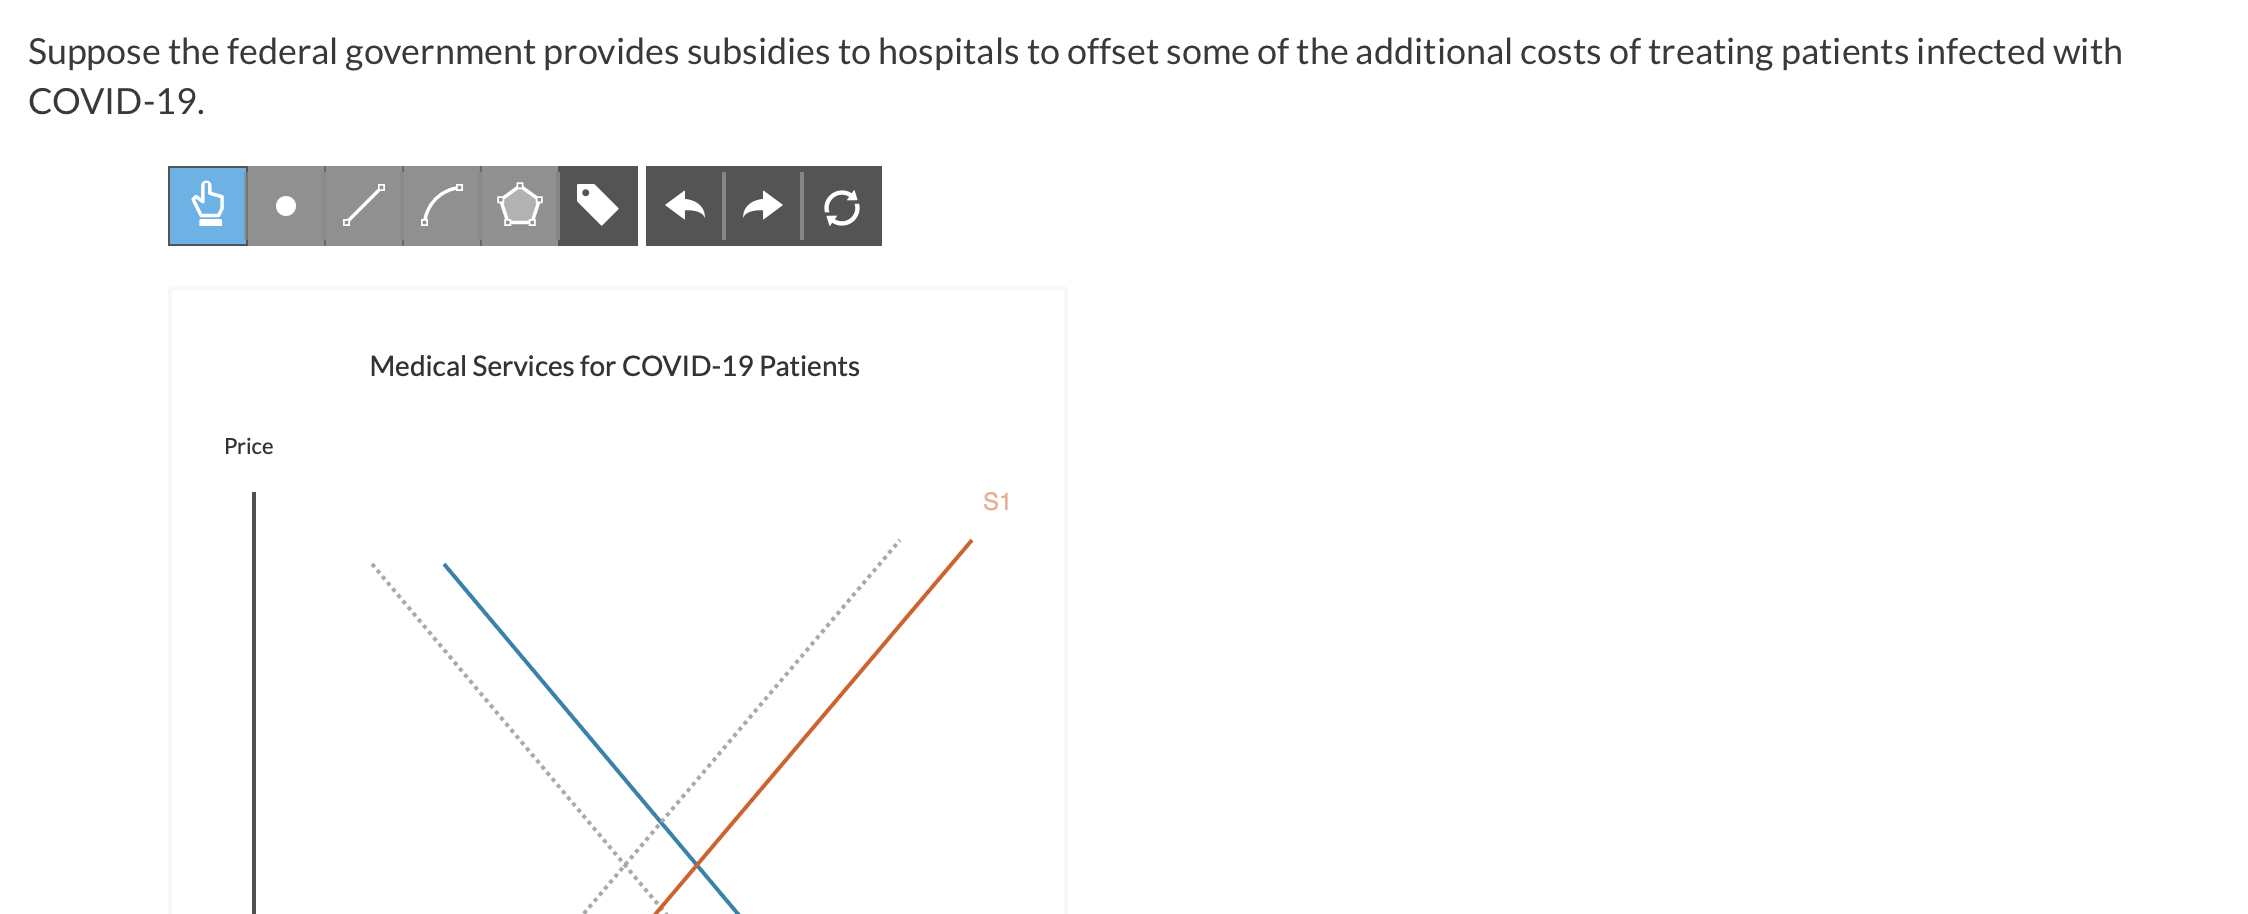 Suppose the federal government provides subsidies to hospitals to offset some of the additional costs of treating patients in